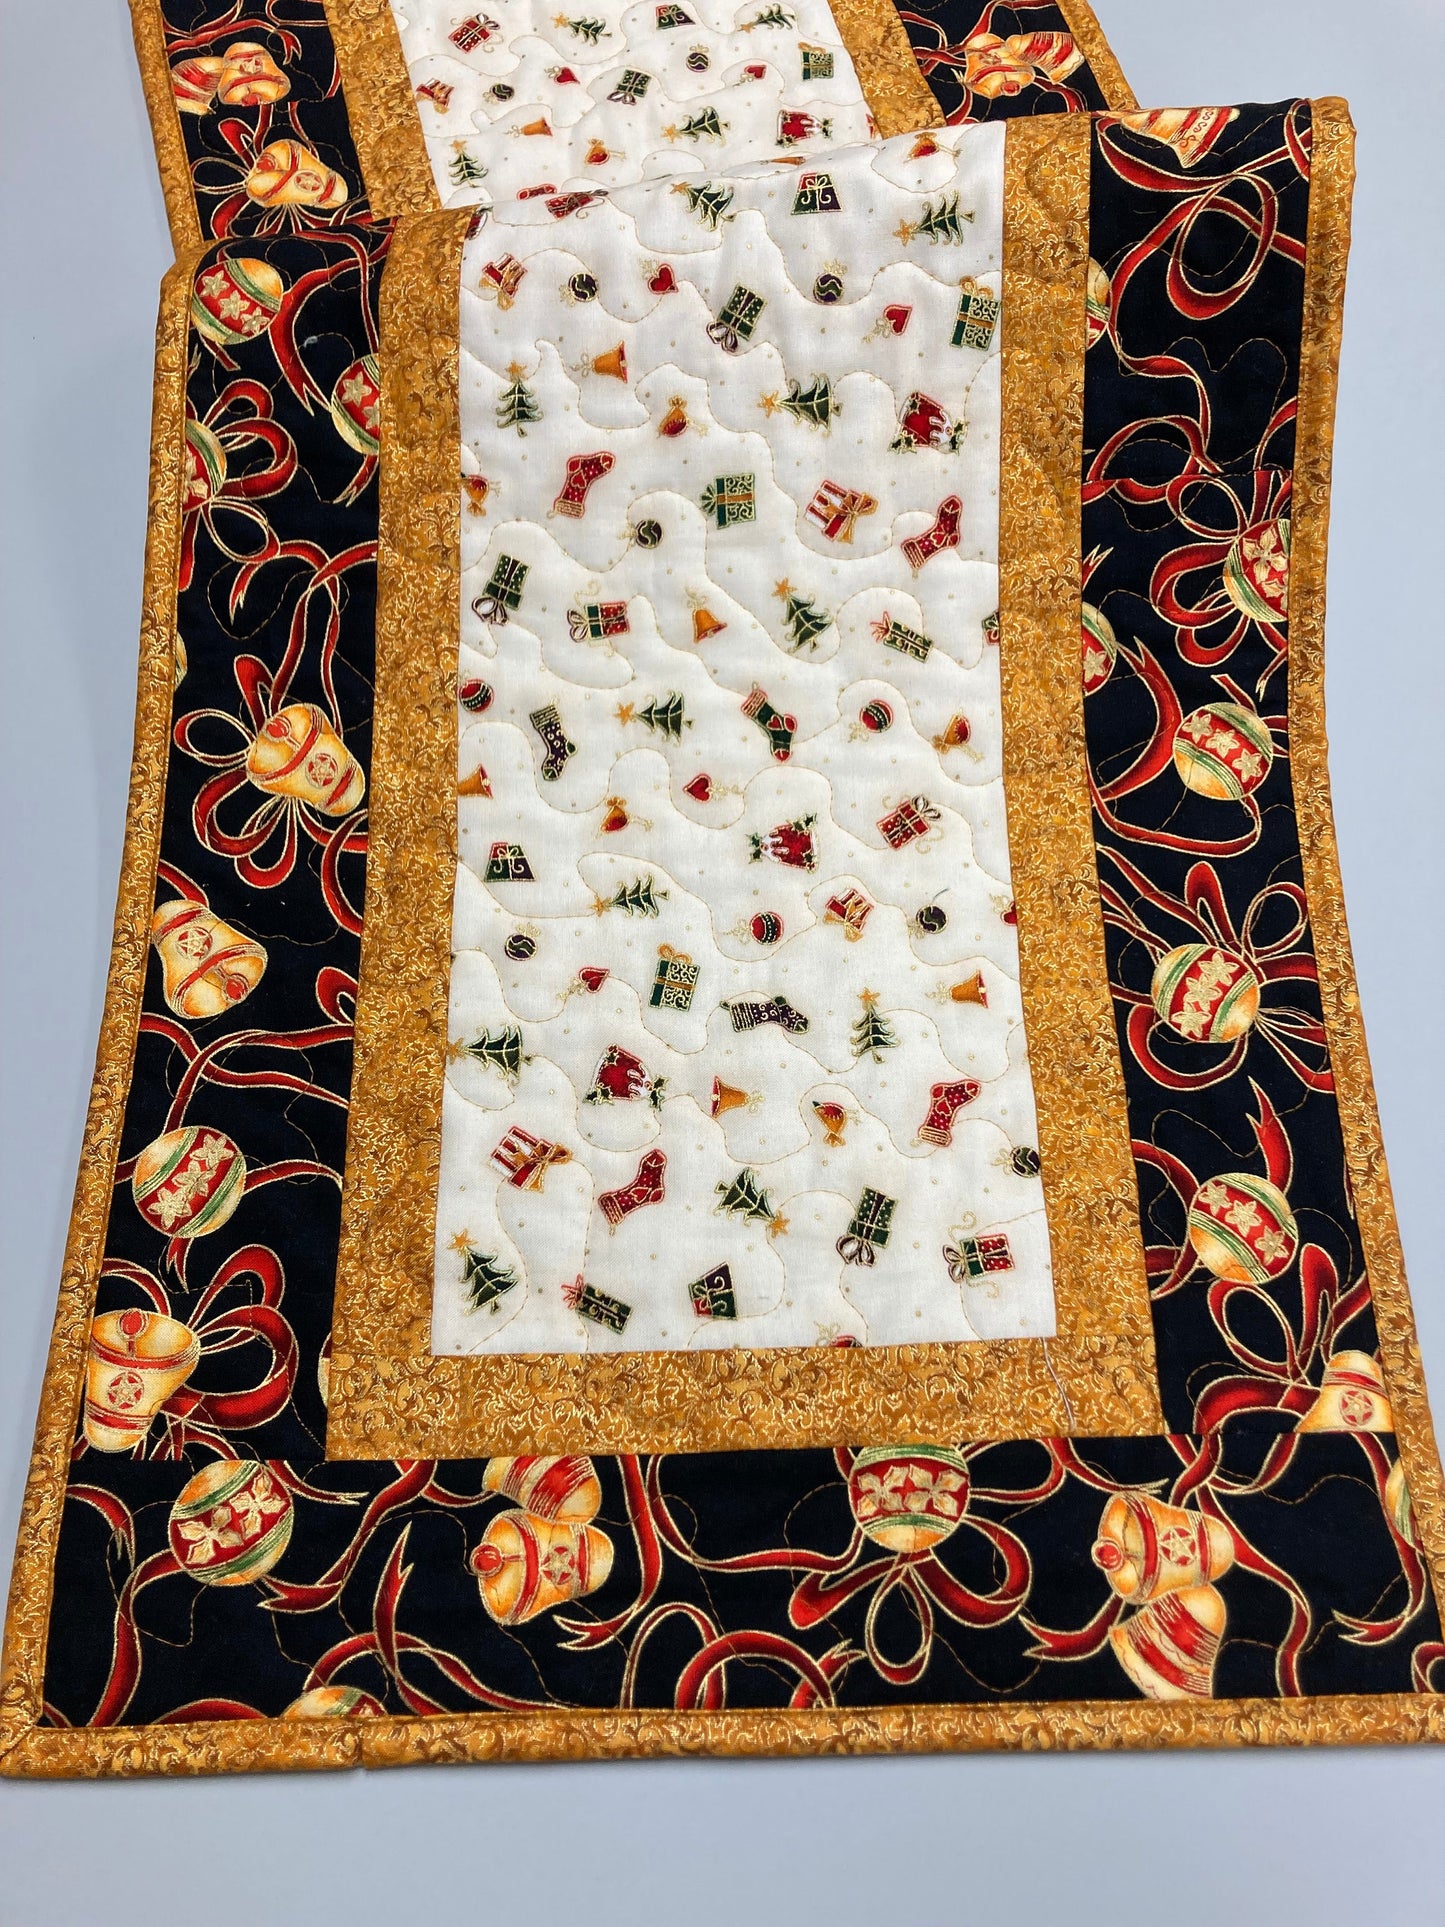 Christmas Ornaments Quilted Table Runner, 13x48", Gold Red Ribbon, Winter Holiday Dining Coffee Table, Dresser Scarf End Table Handmade